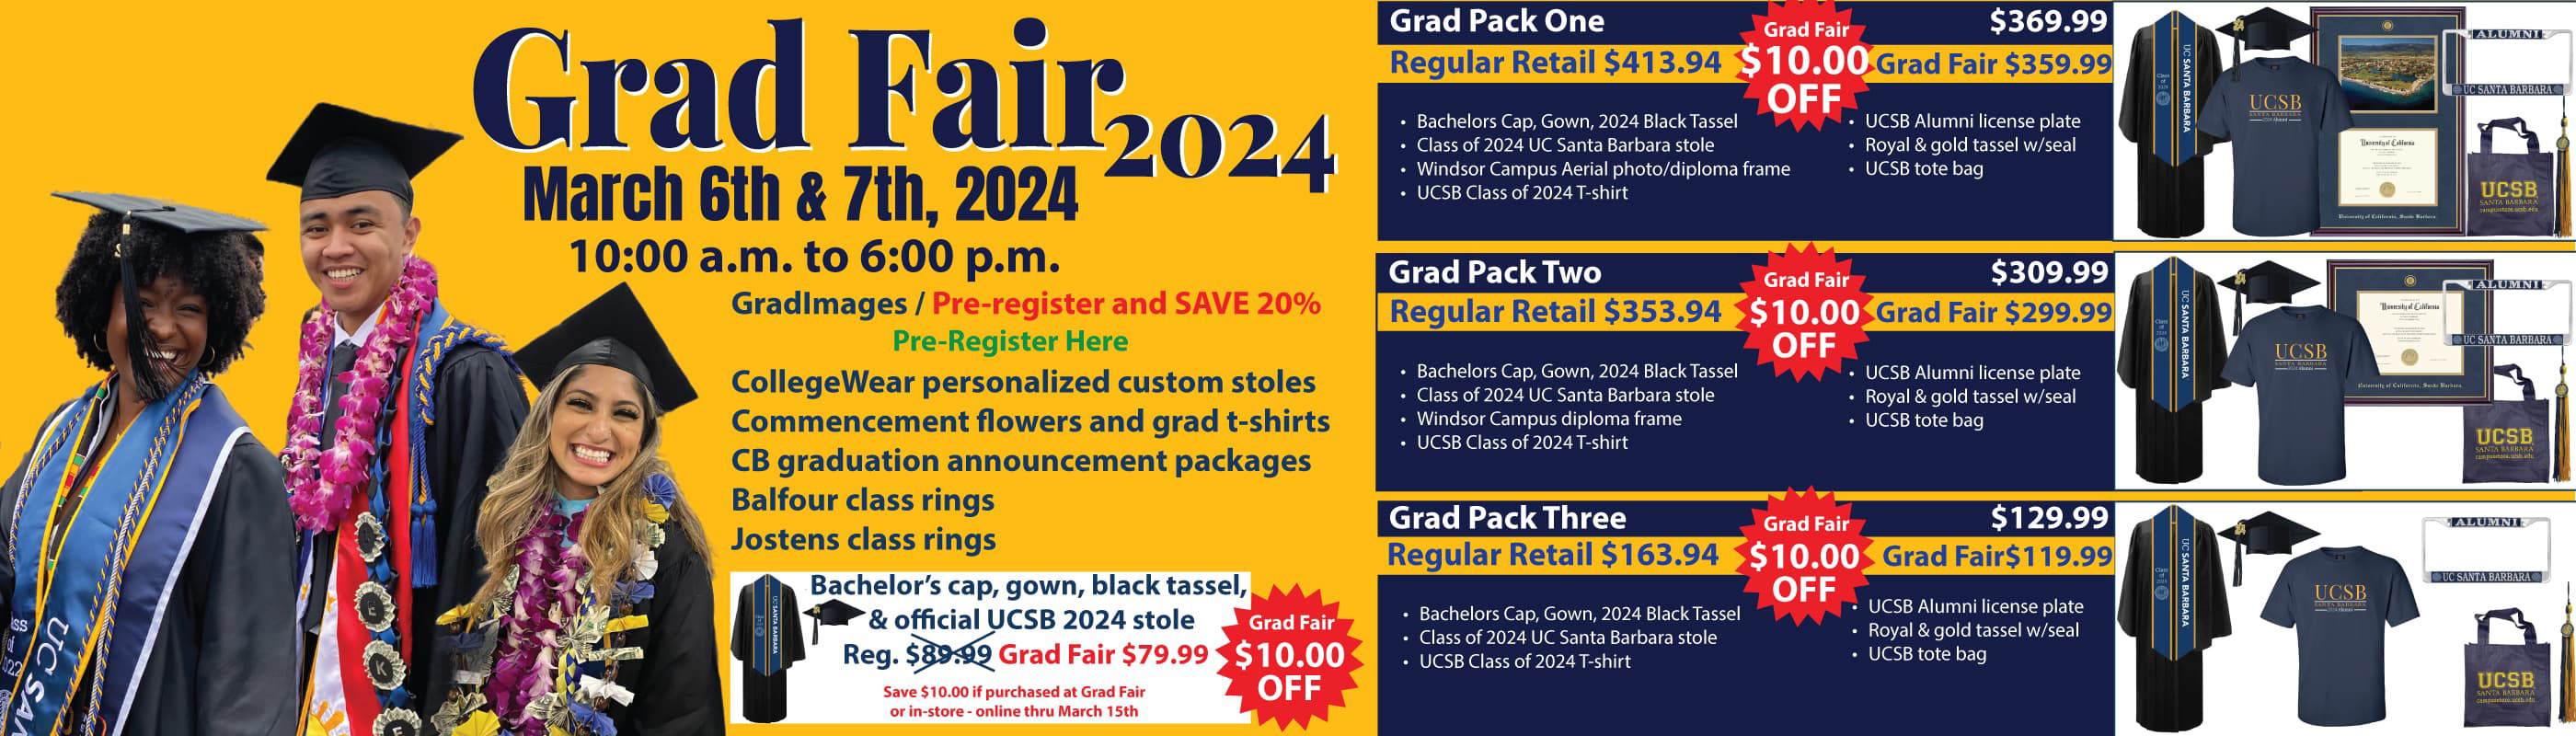 Grad Fair March 6th and 7th 10am to 6pm